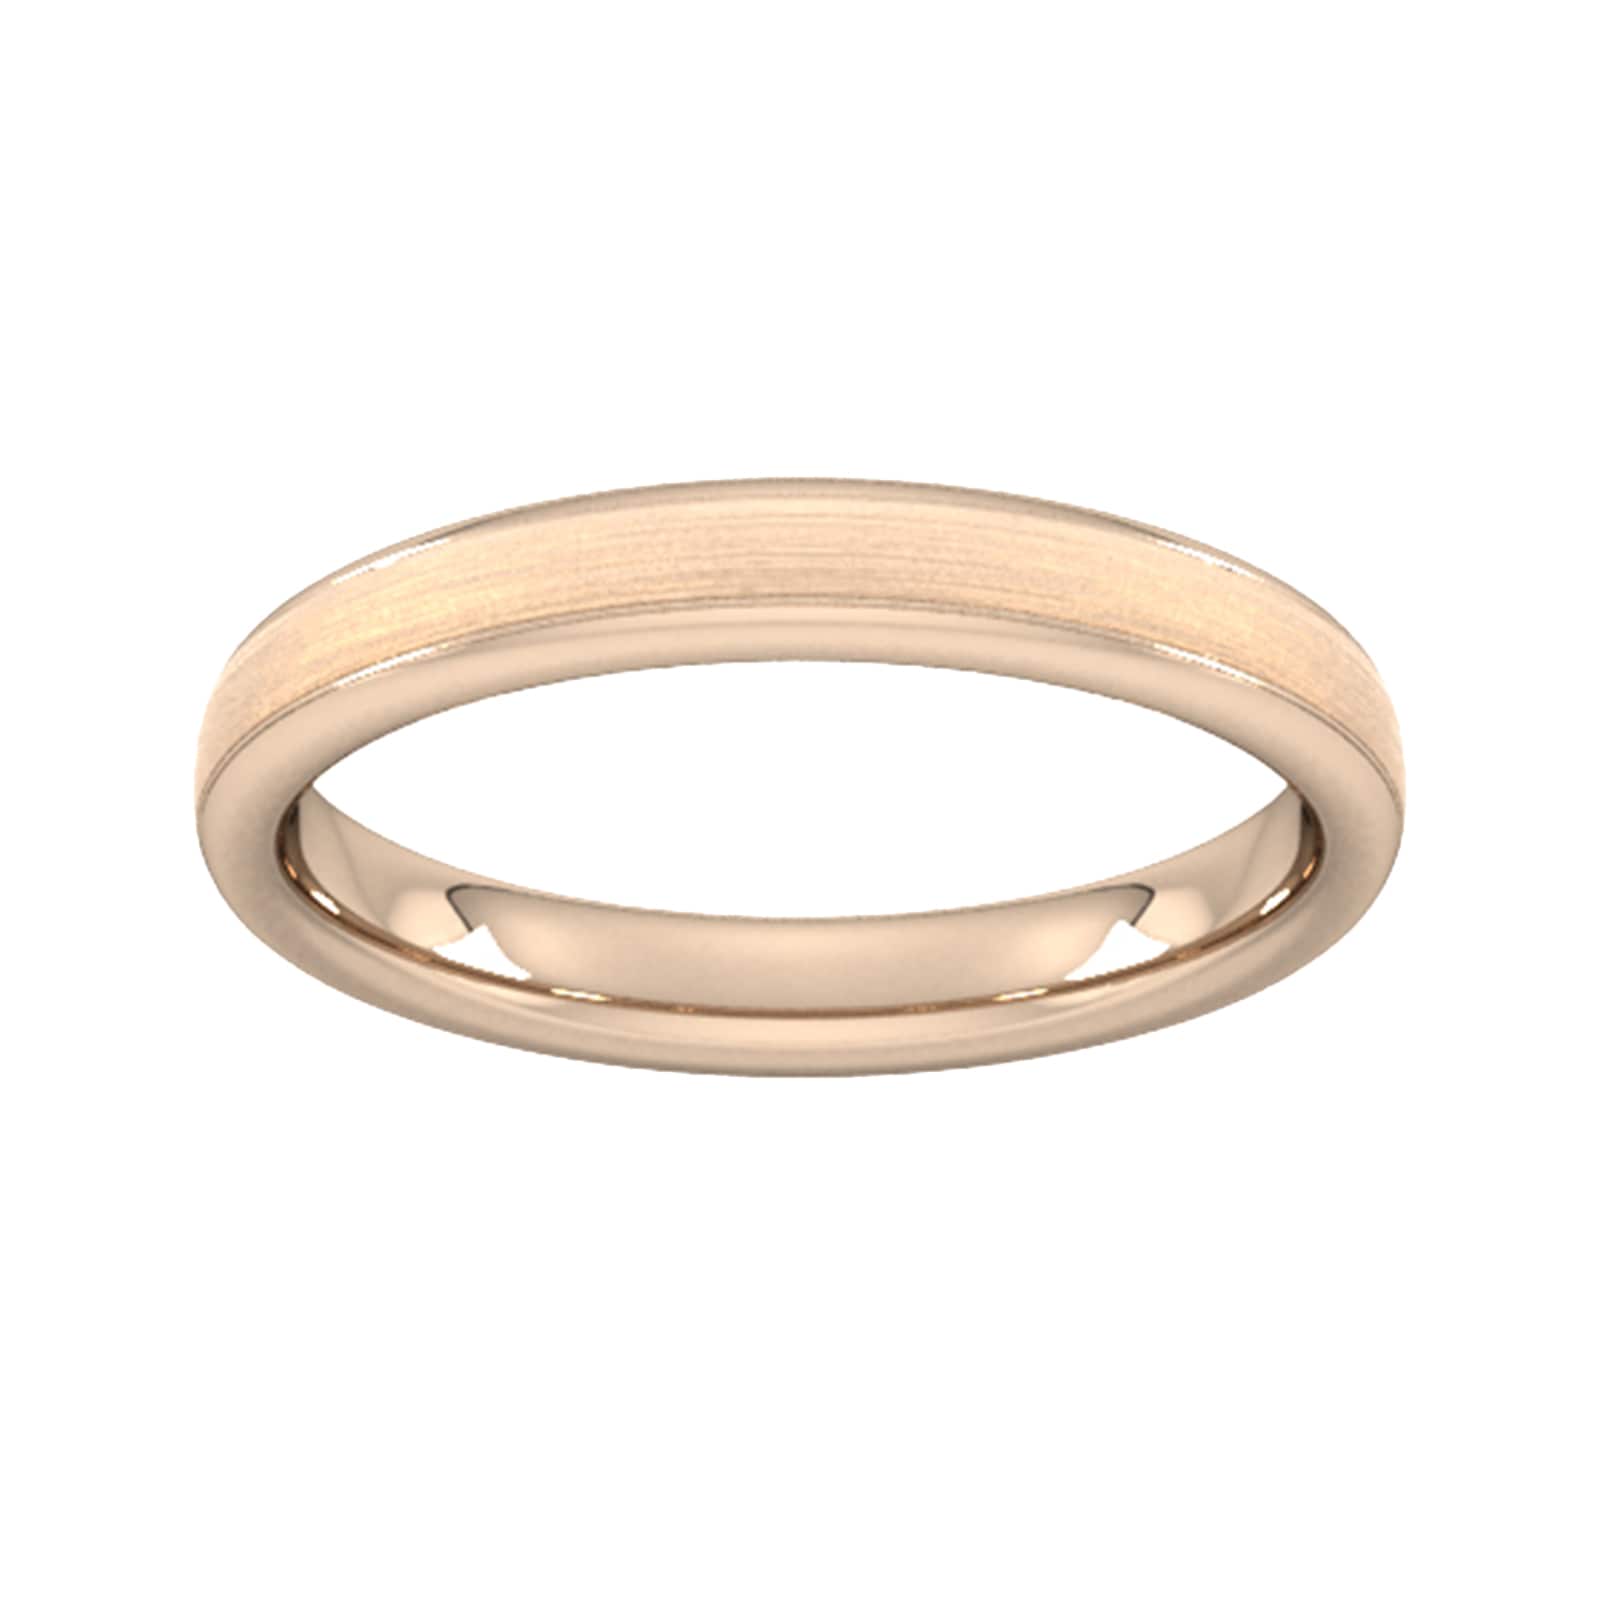 3mm D Shape Heavy Matt Centre With Grooves Wedding Ring In 18 Carat Rose Gold - Ring Size P